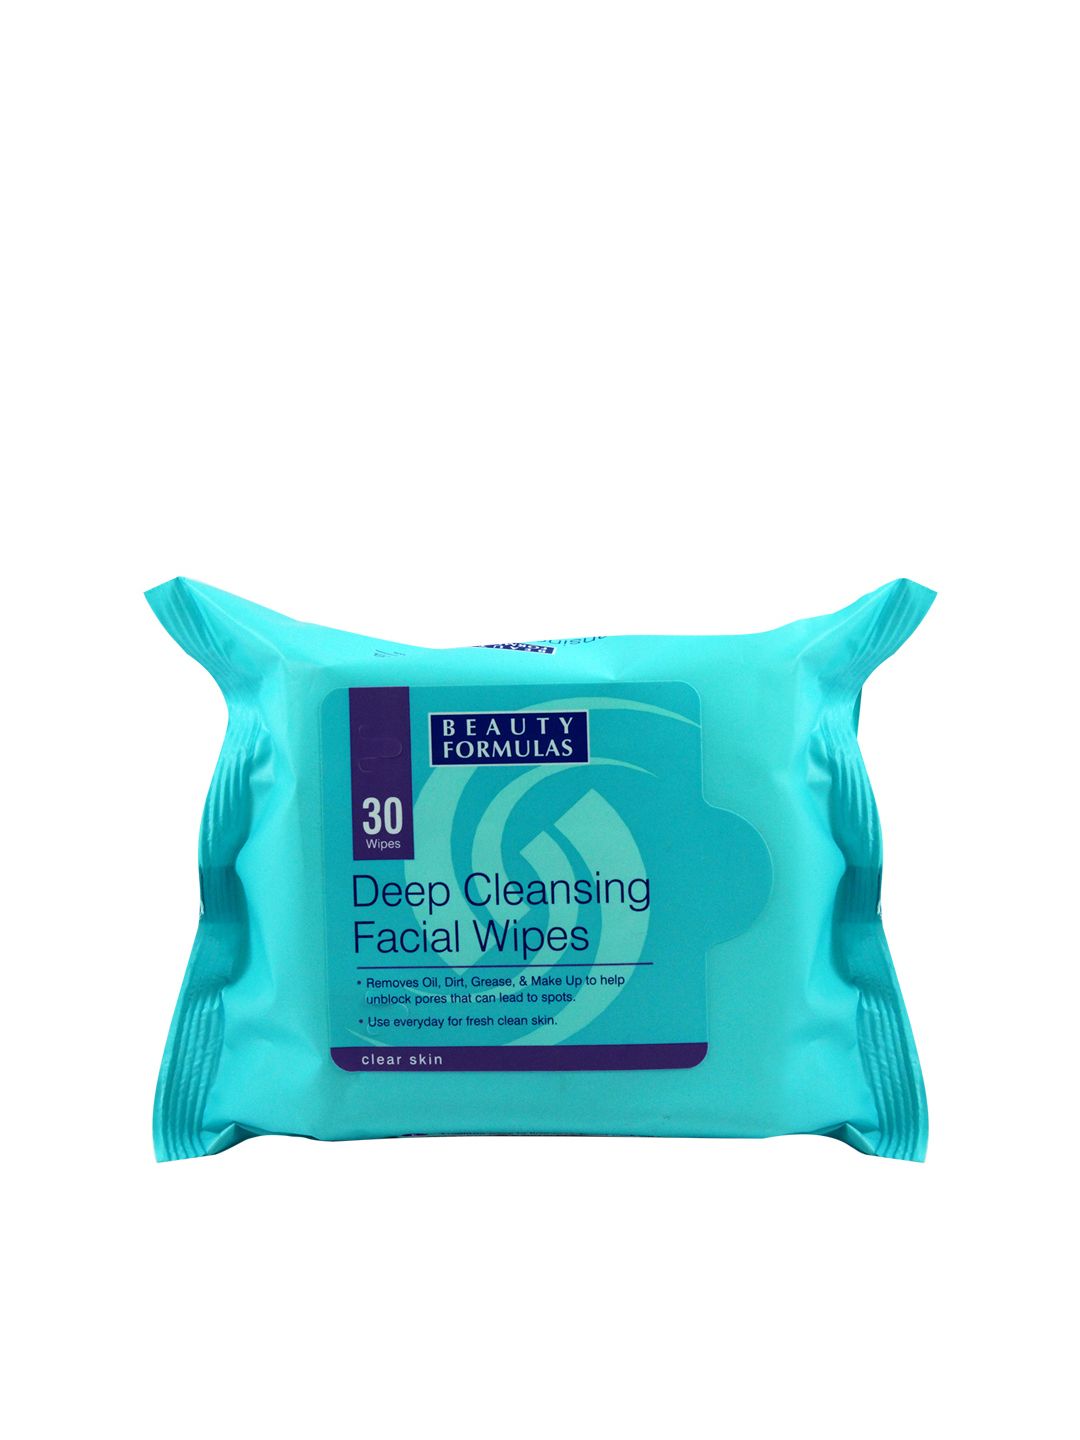 Clean clear deep cleansing facial wipes